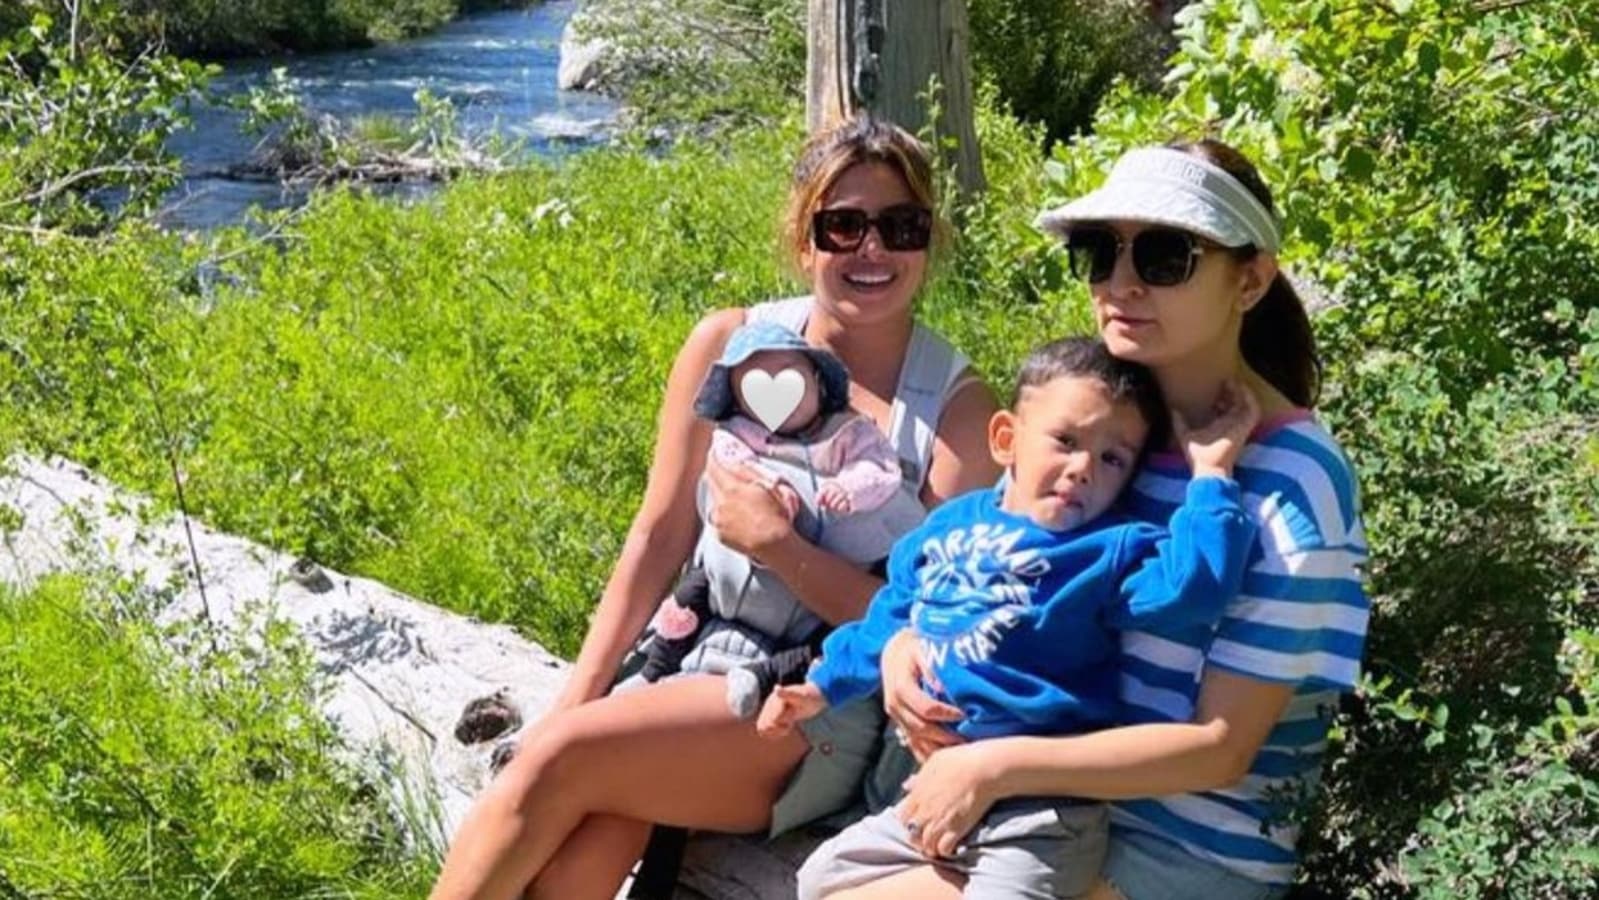 Priyanka Chopra is all smiles as she steps out with daughter Malti Marie Jonas Chopra, shares photo from their hike